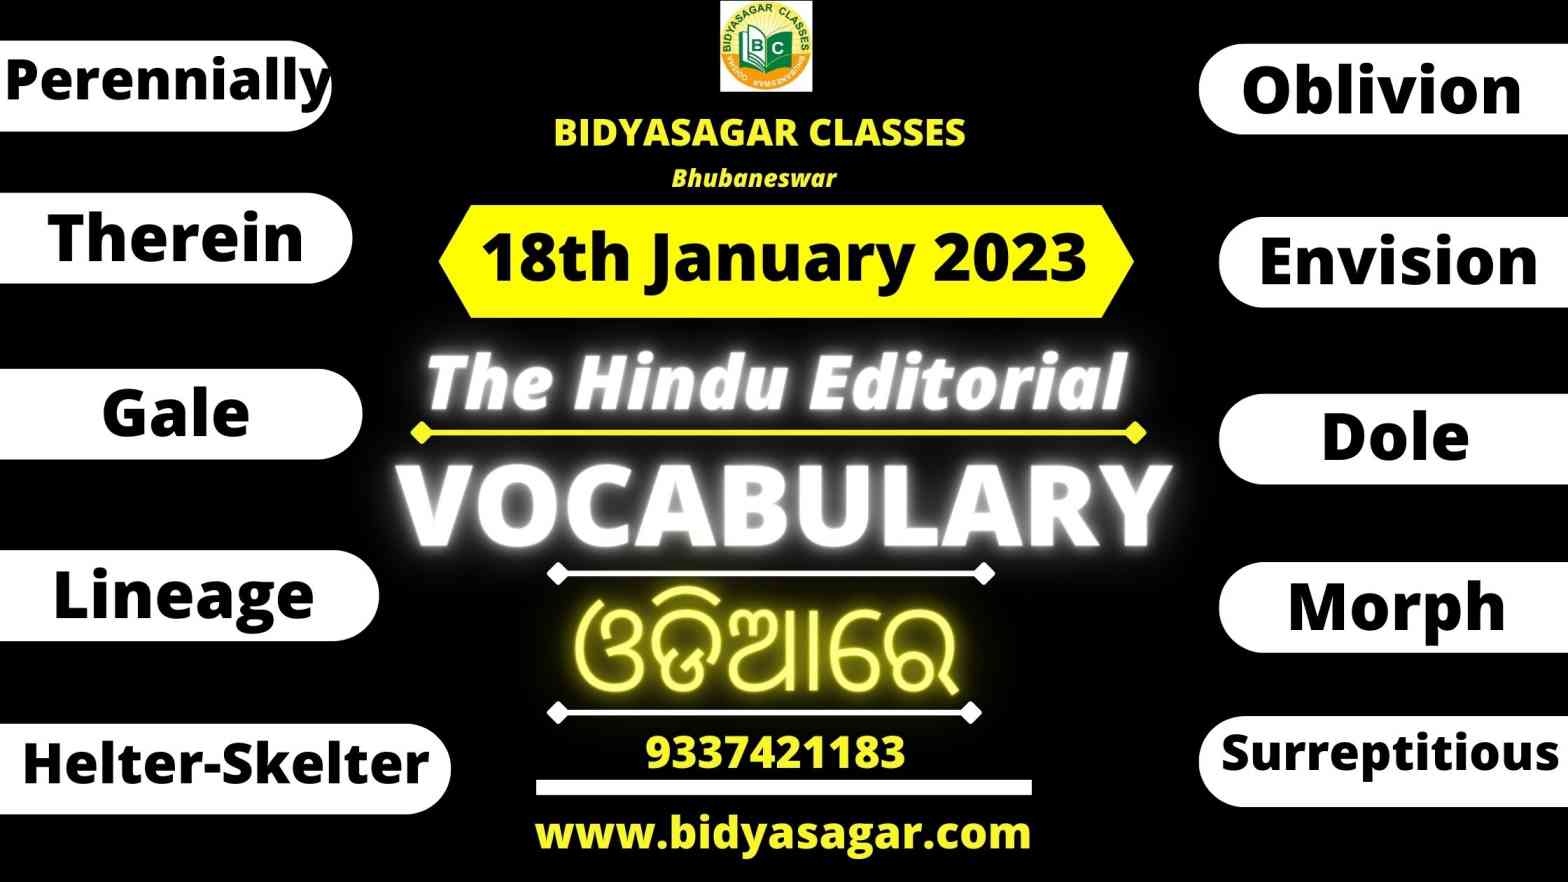 The Hindu Editorial Vocabulary of 18th January 2023